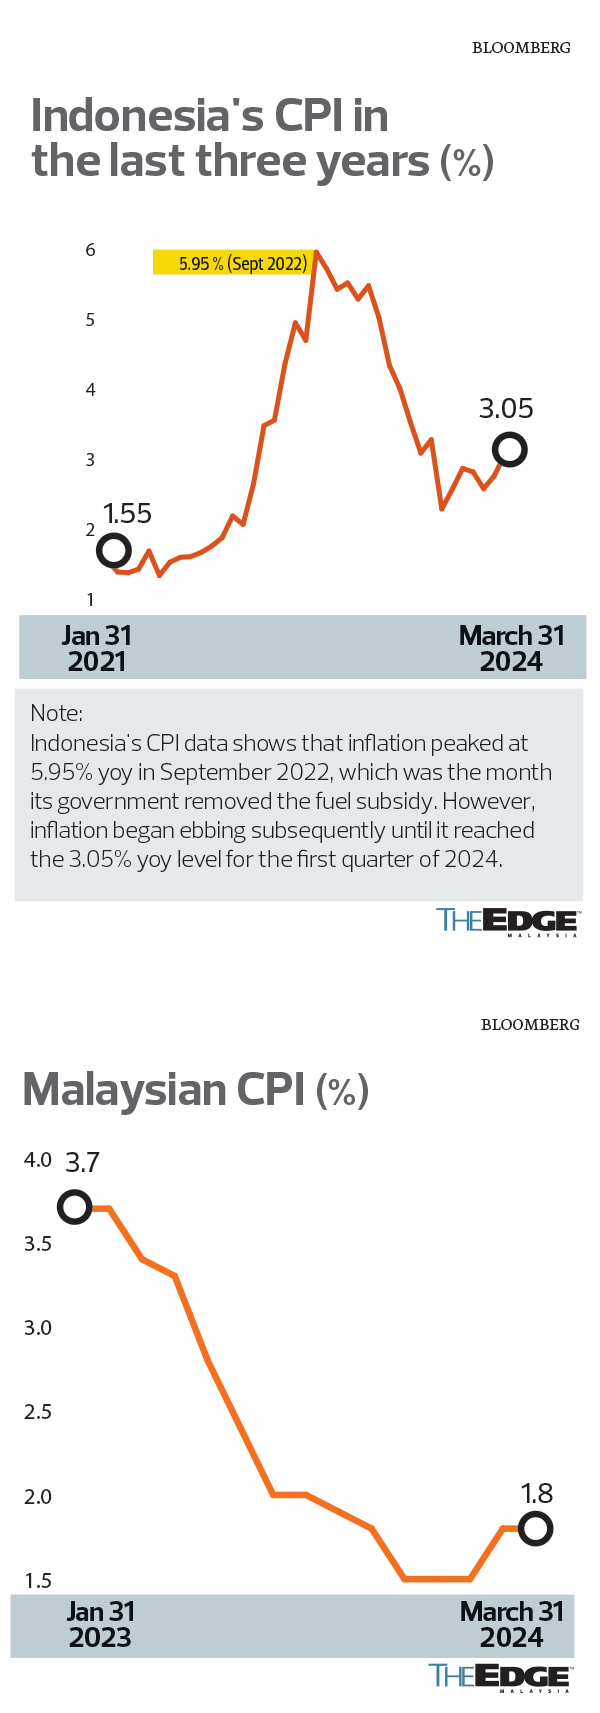 android, the state of the nation: no pressure for malaysia to follow suit after indonesia’s surprise rate hike, economists say